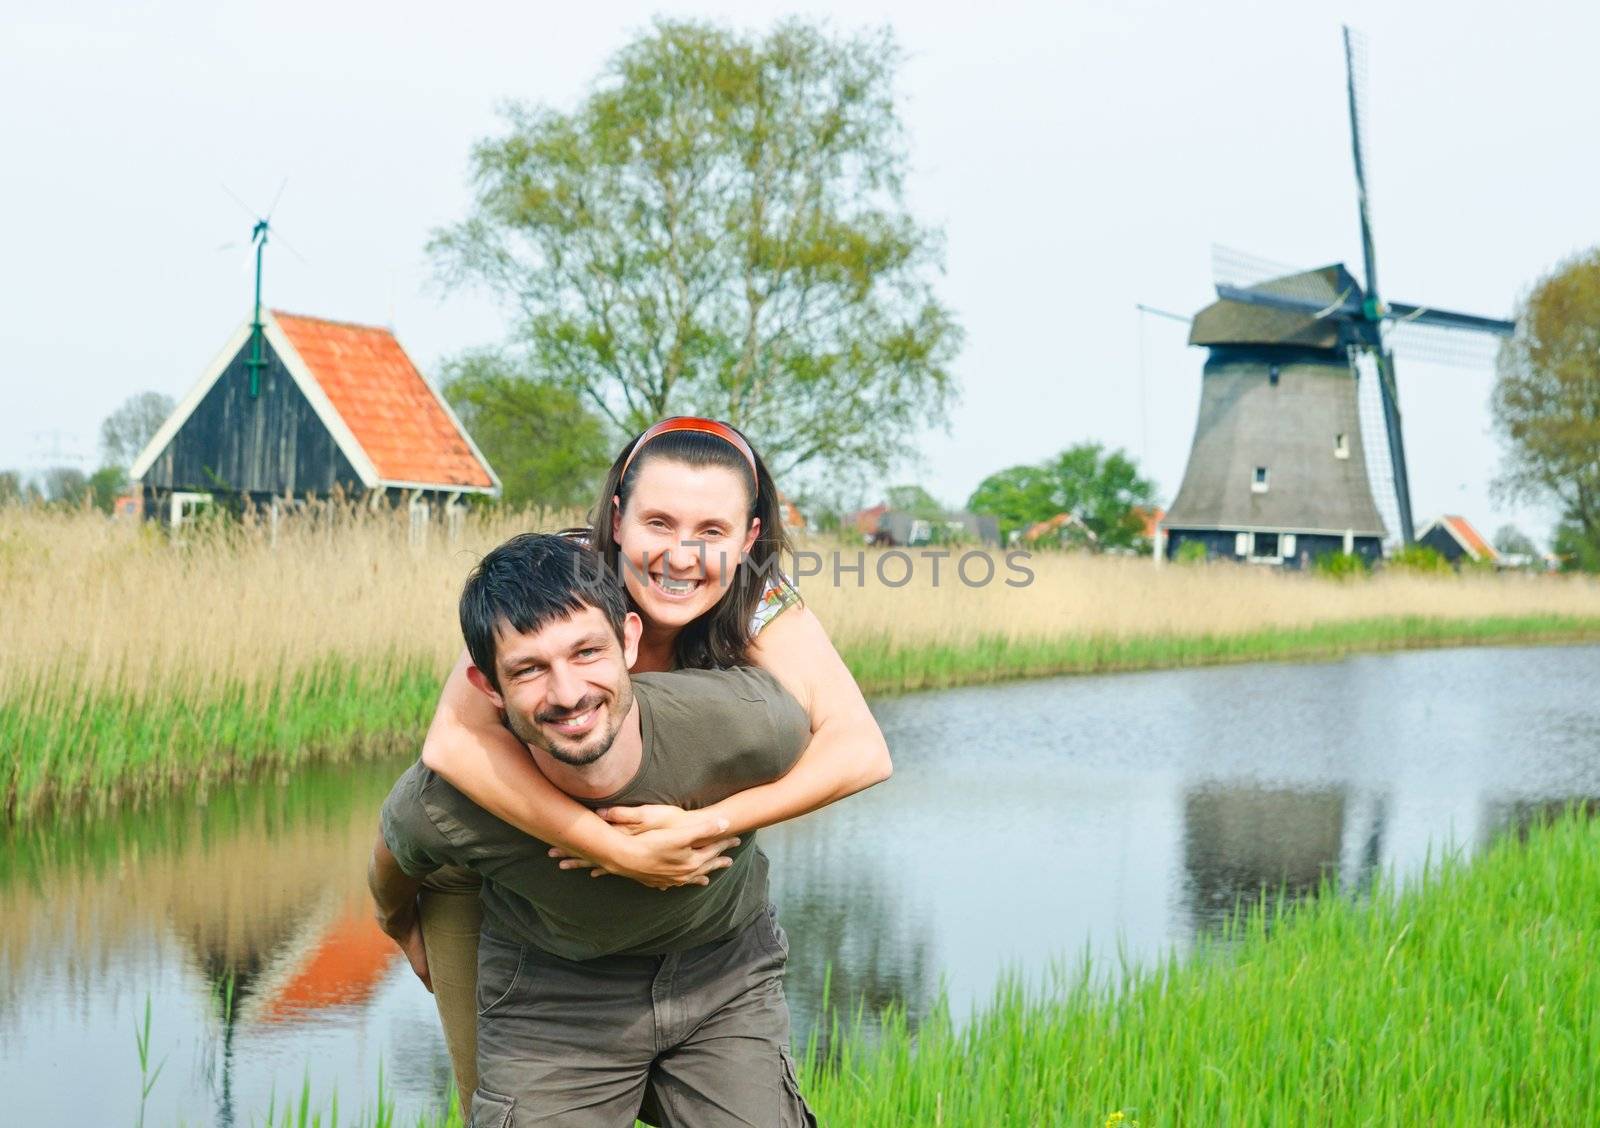 In Tulip Field. Happy young couple near Duch mills by maxoliki